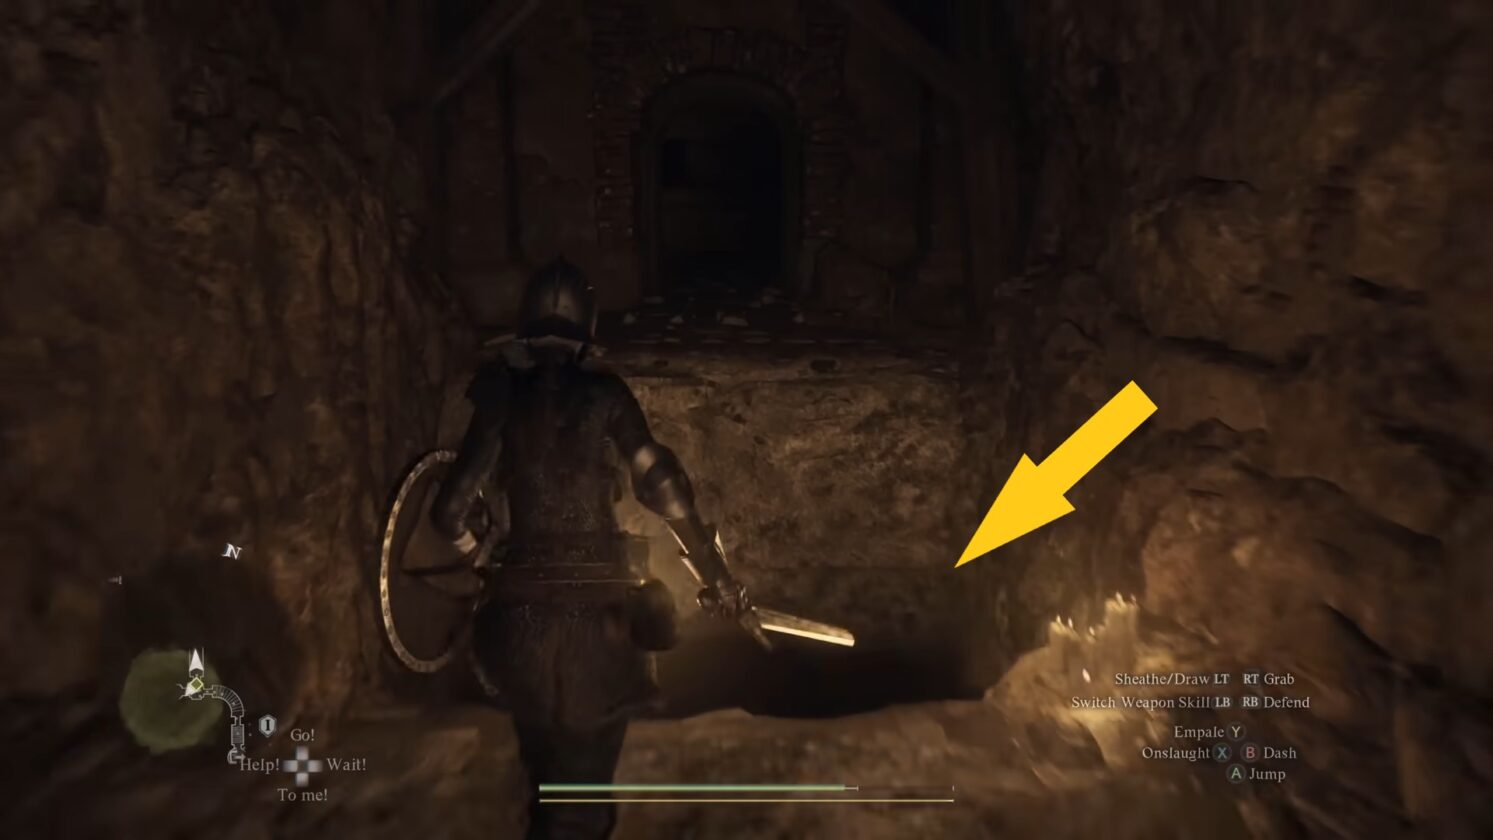 Crypt inside the cave in Dragon Dogma 2